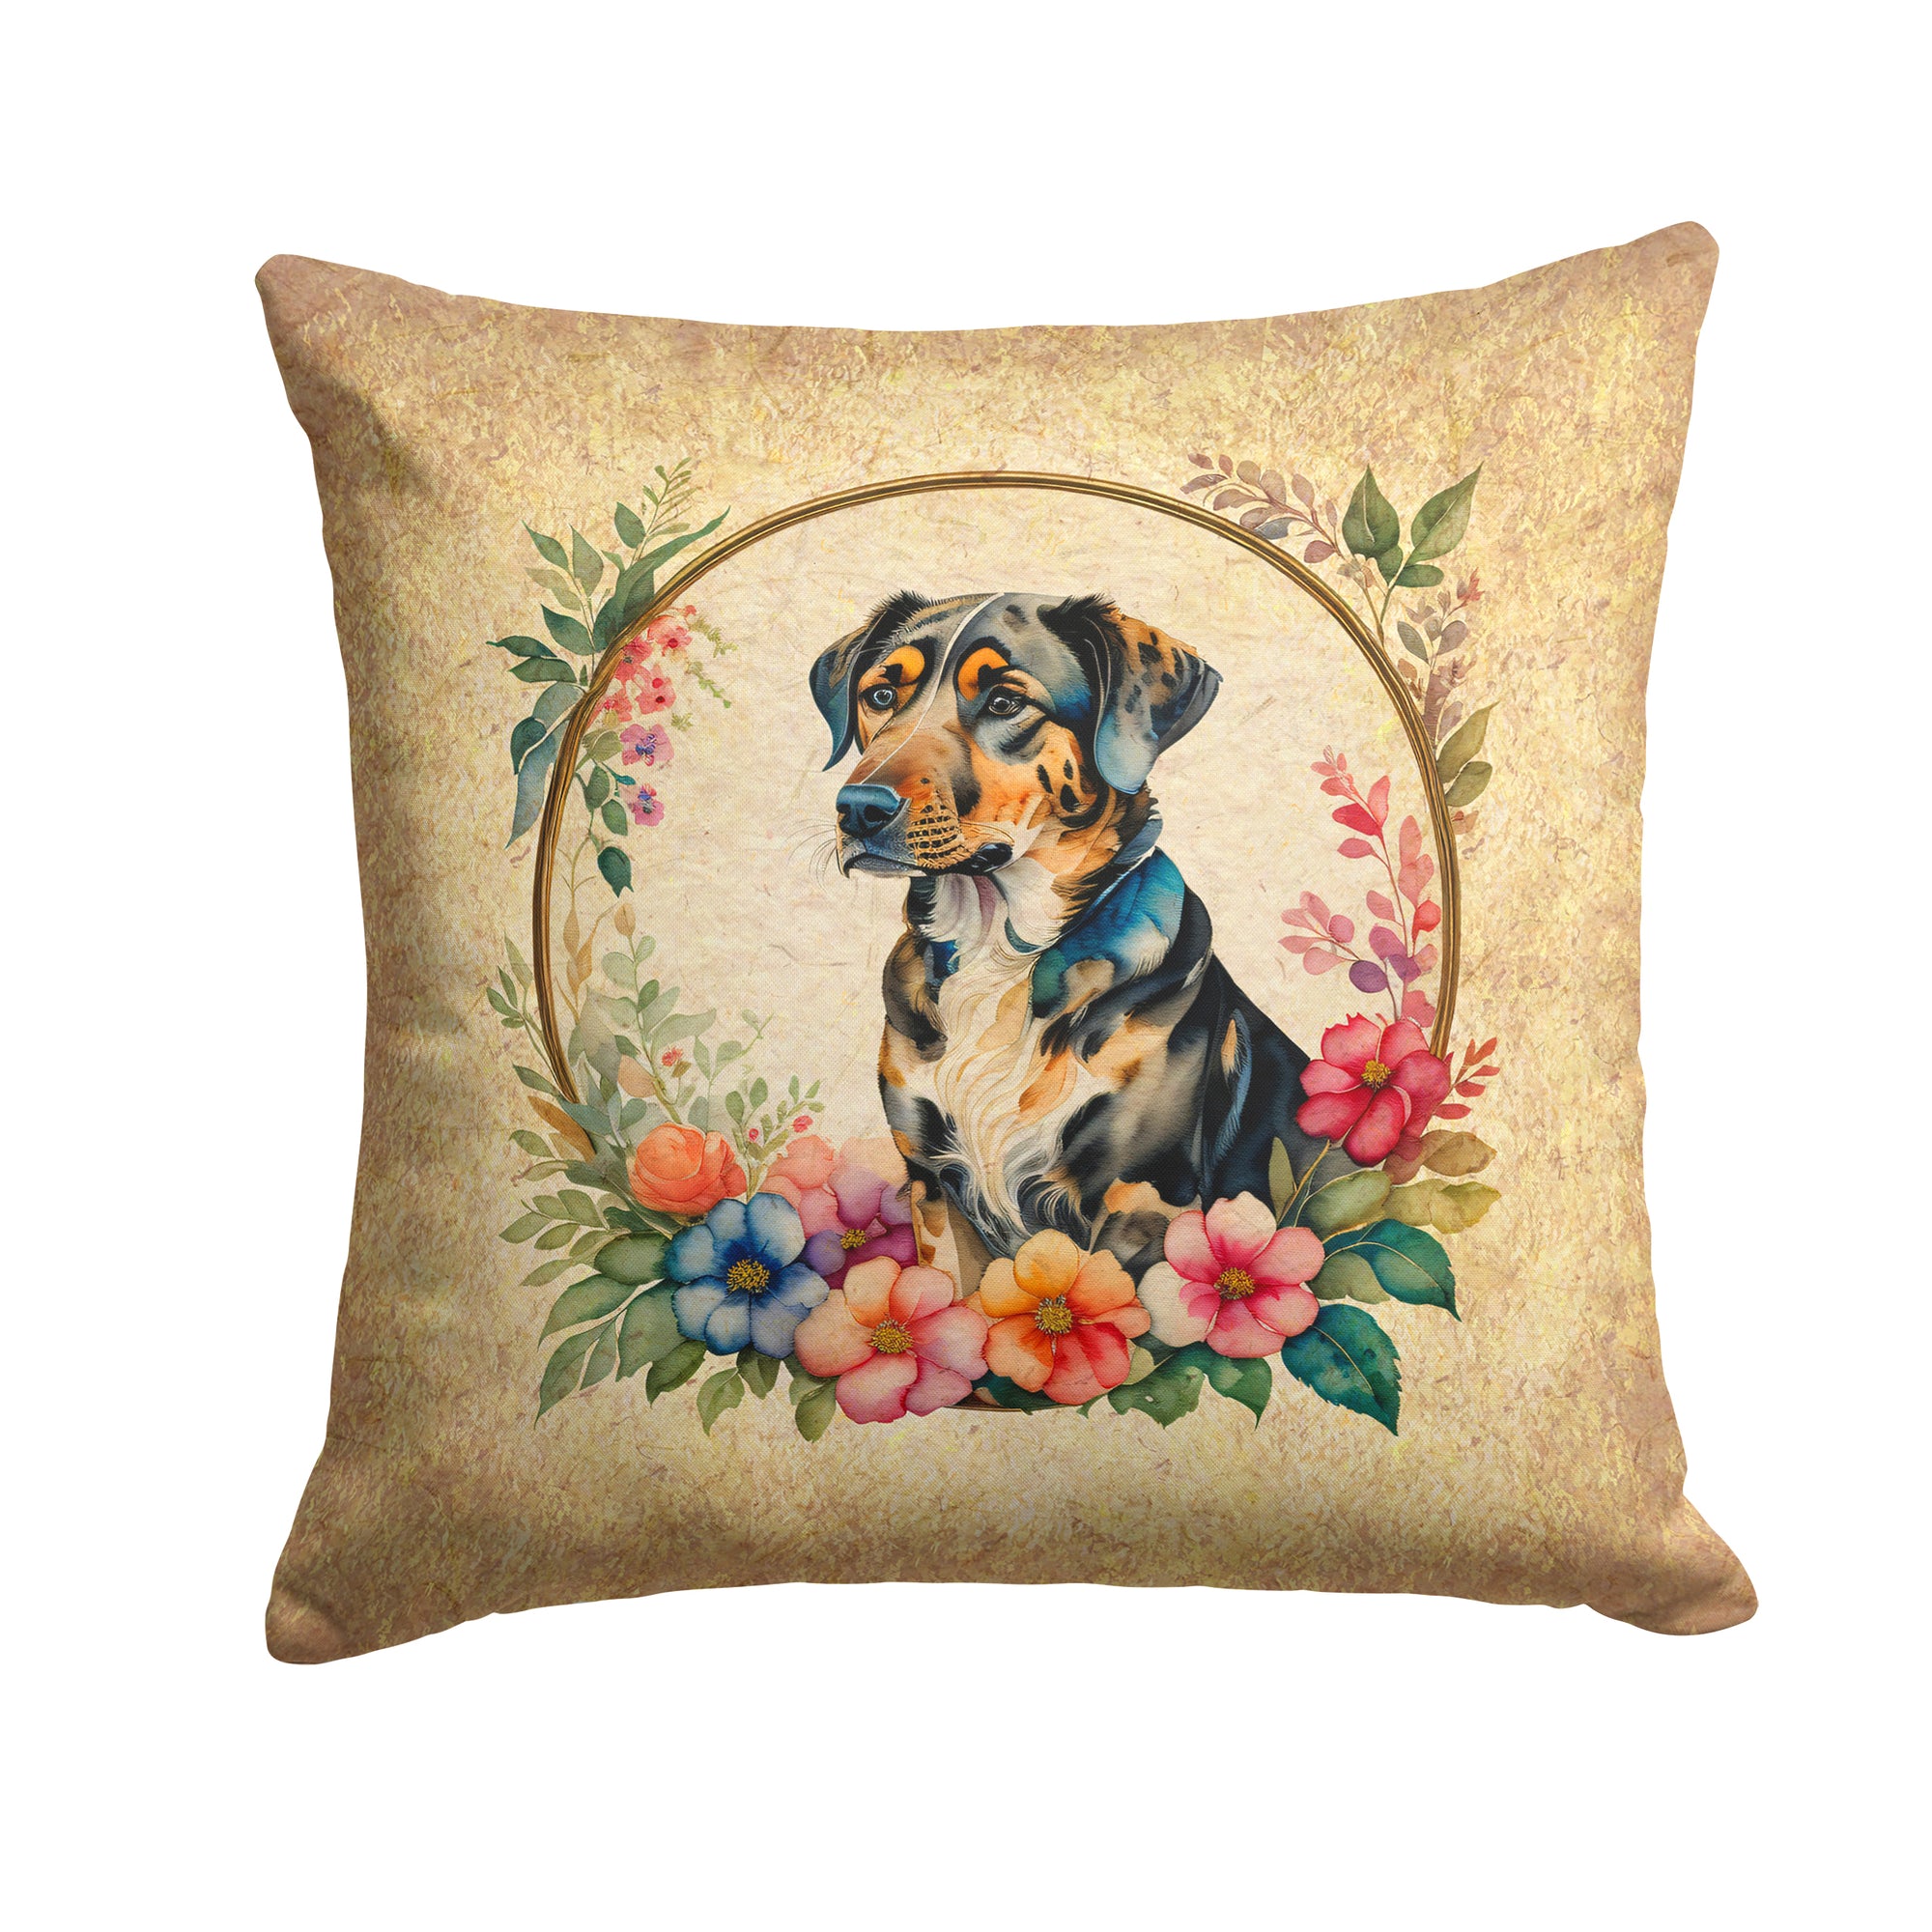 Buy this Catahoula Leopard Dog and Flowers Fabric Decorative Pillow